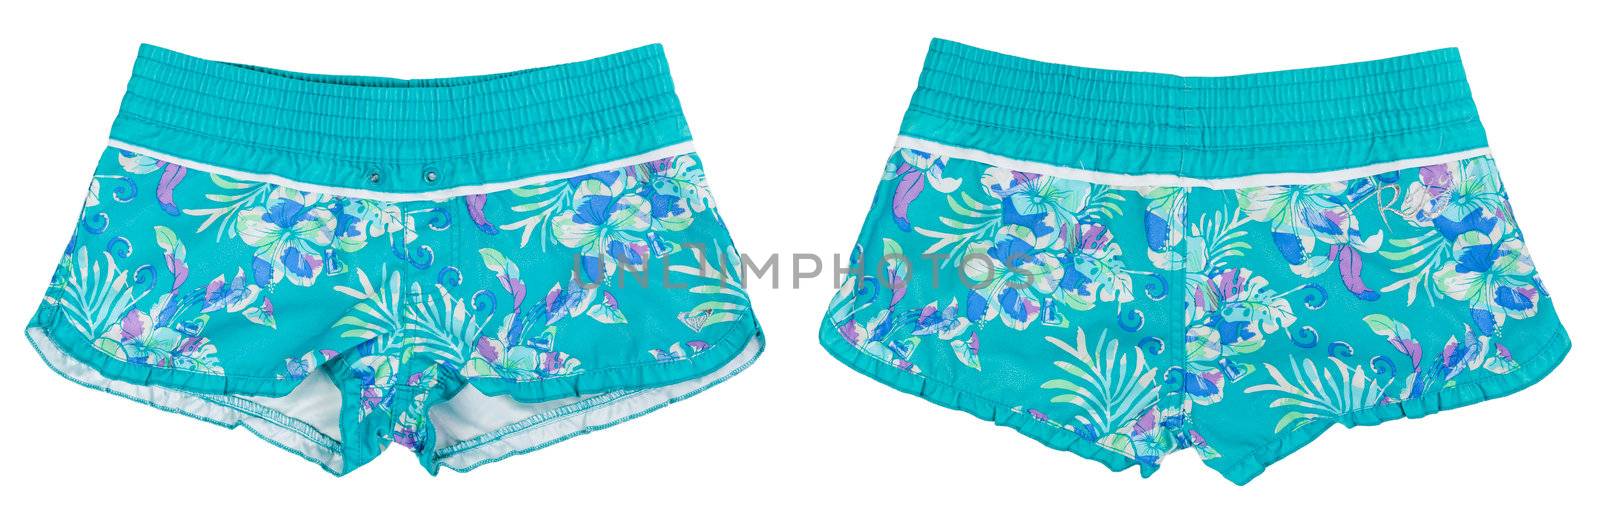 collage of women's beach shorts with blue pattern isolated on white background